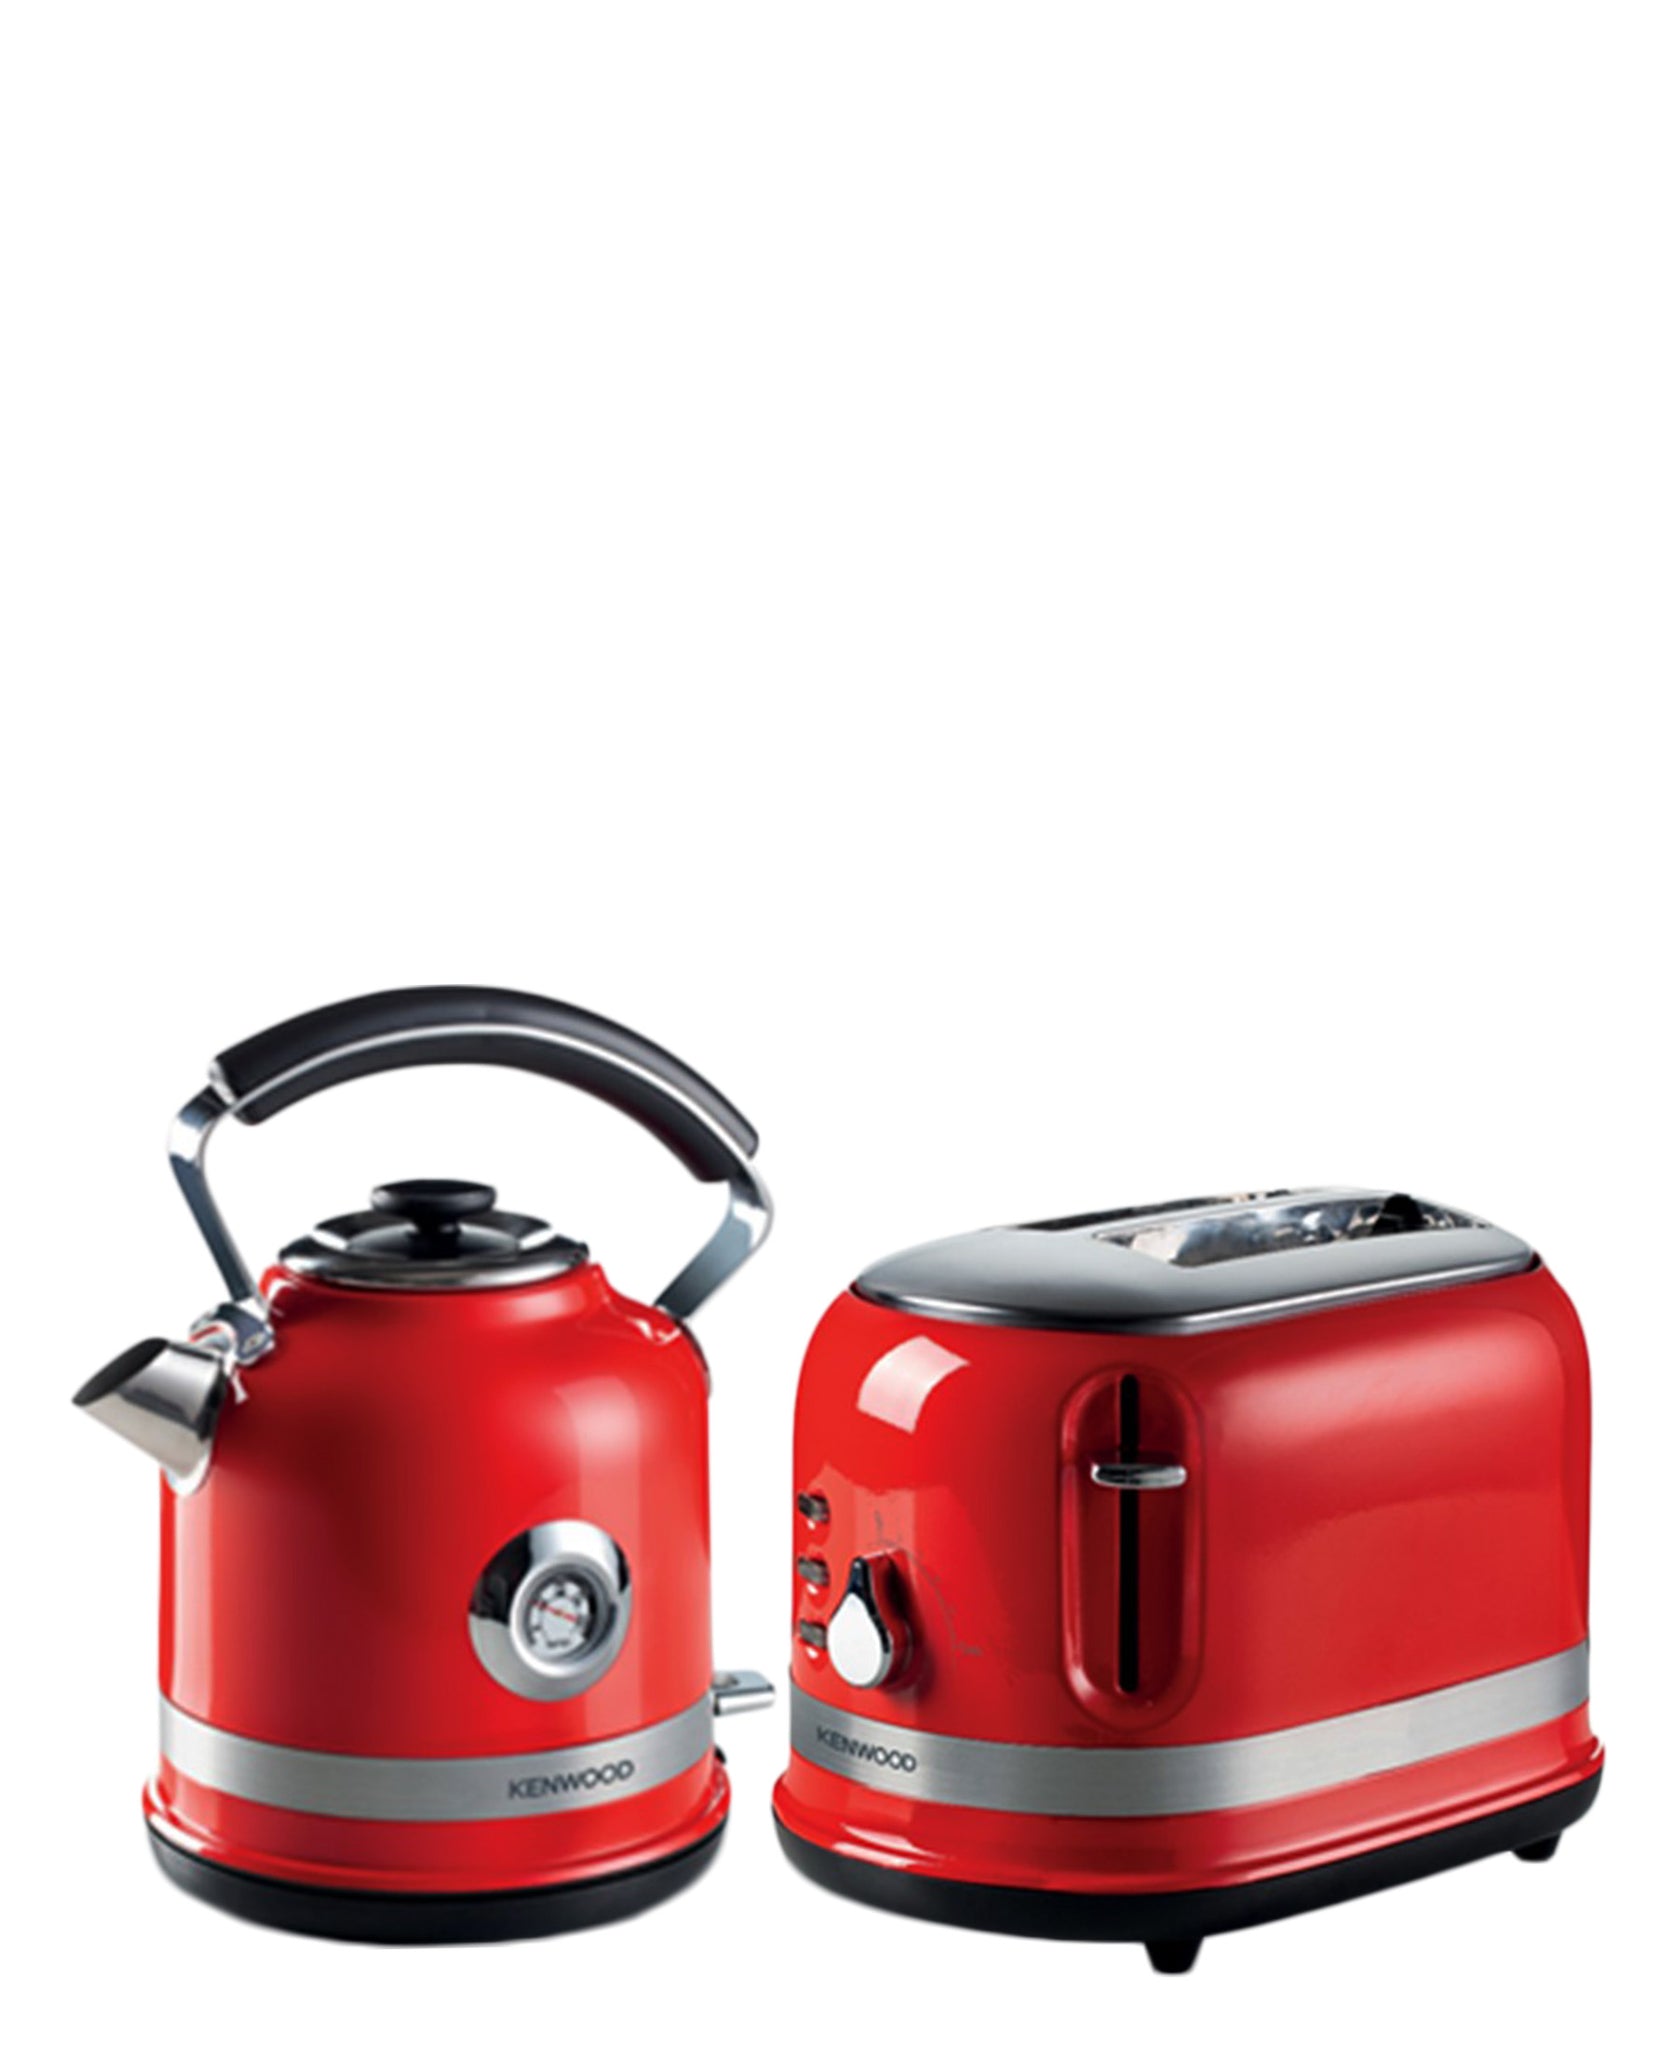 Kenwood Classic 2 Piece Kettle & Toaster Breakfast Pack - Red